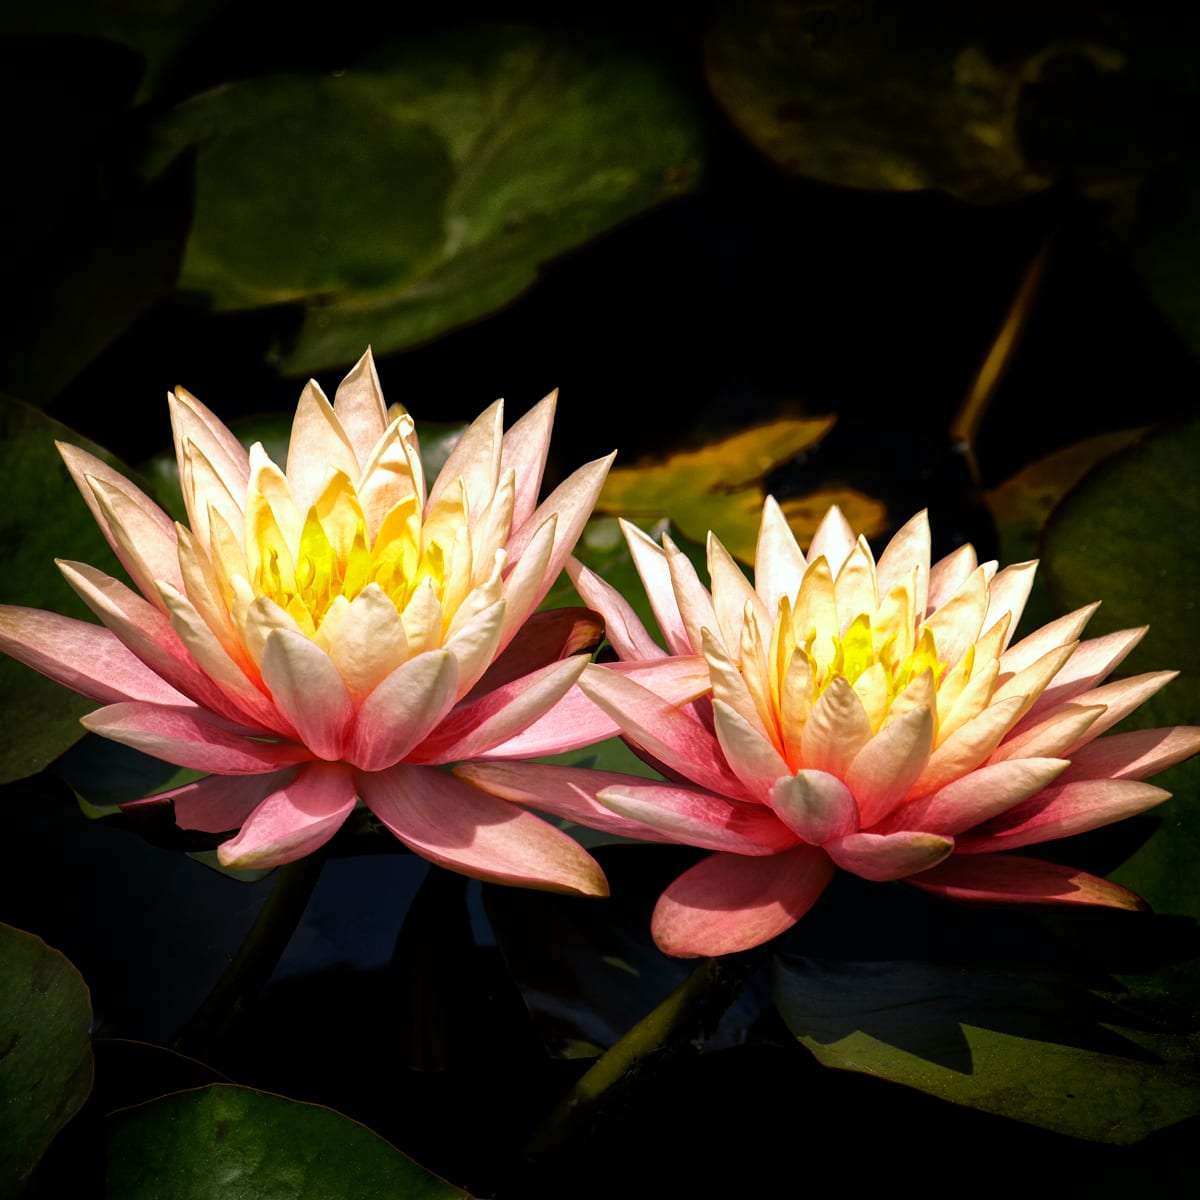 Water Lilly's - 3 by Mark Peacock  Image: Photograph